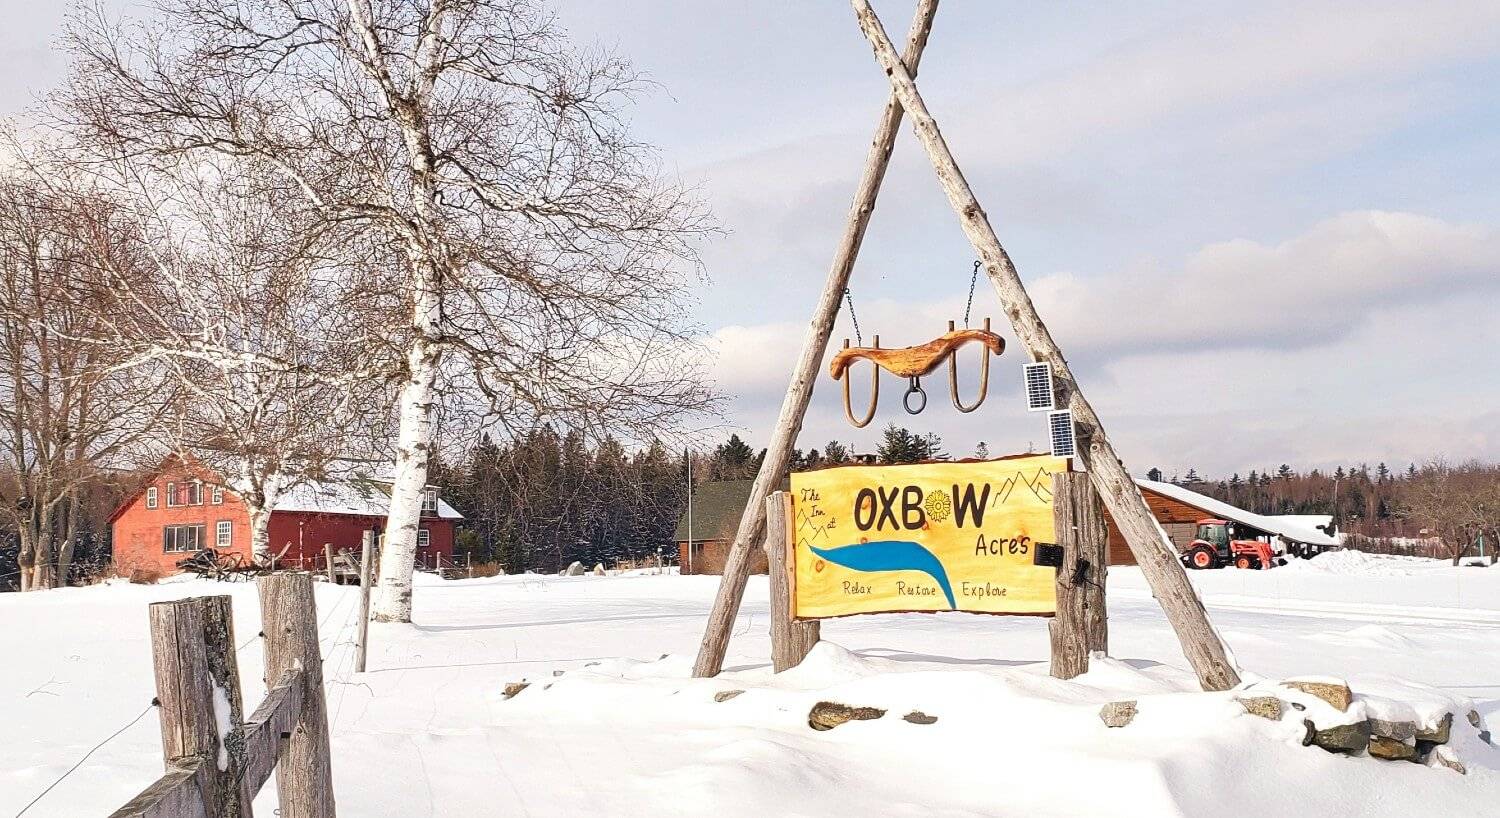 Large wooden sign that says The Inn at Oxbow Acres with oxen yoke on top